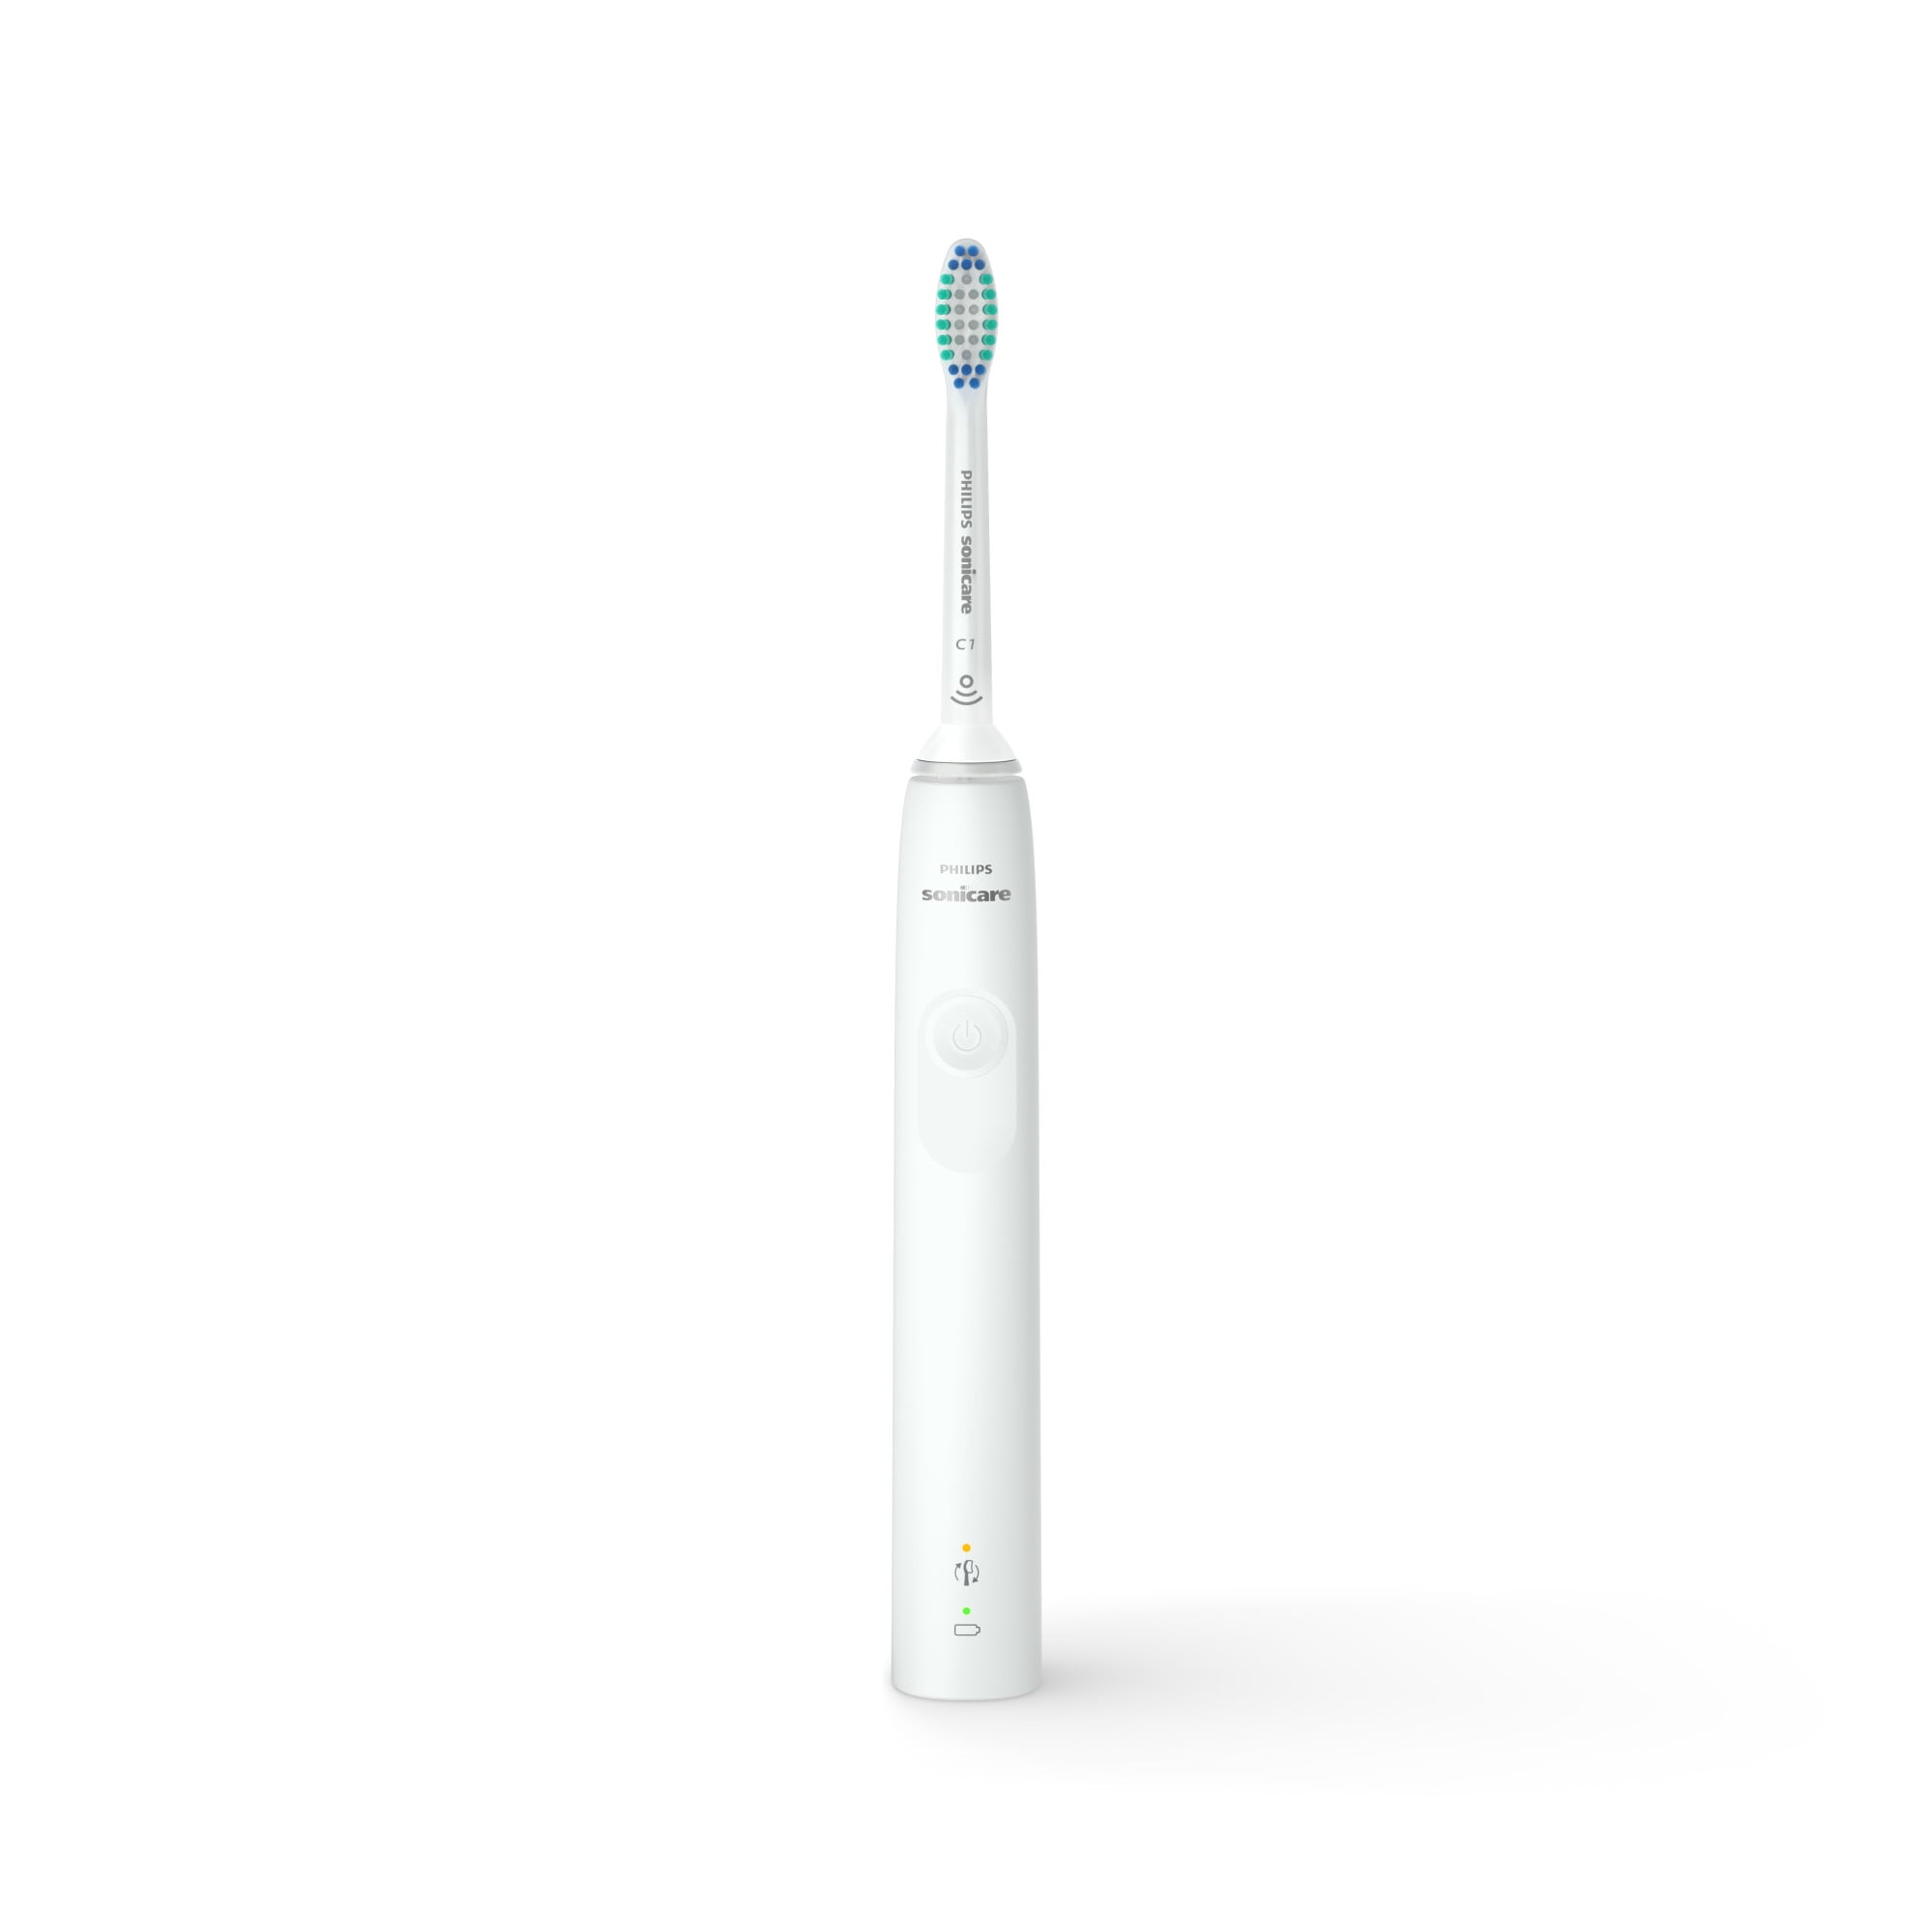 Philips Sonicare 3100 Power Toothbrush, Rechargeable Electric